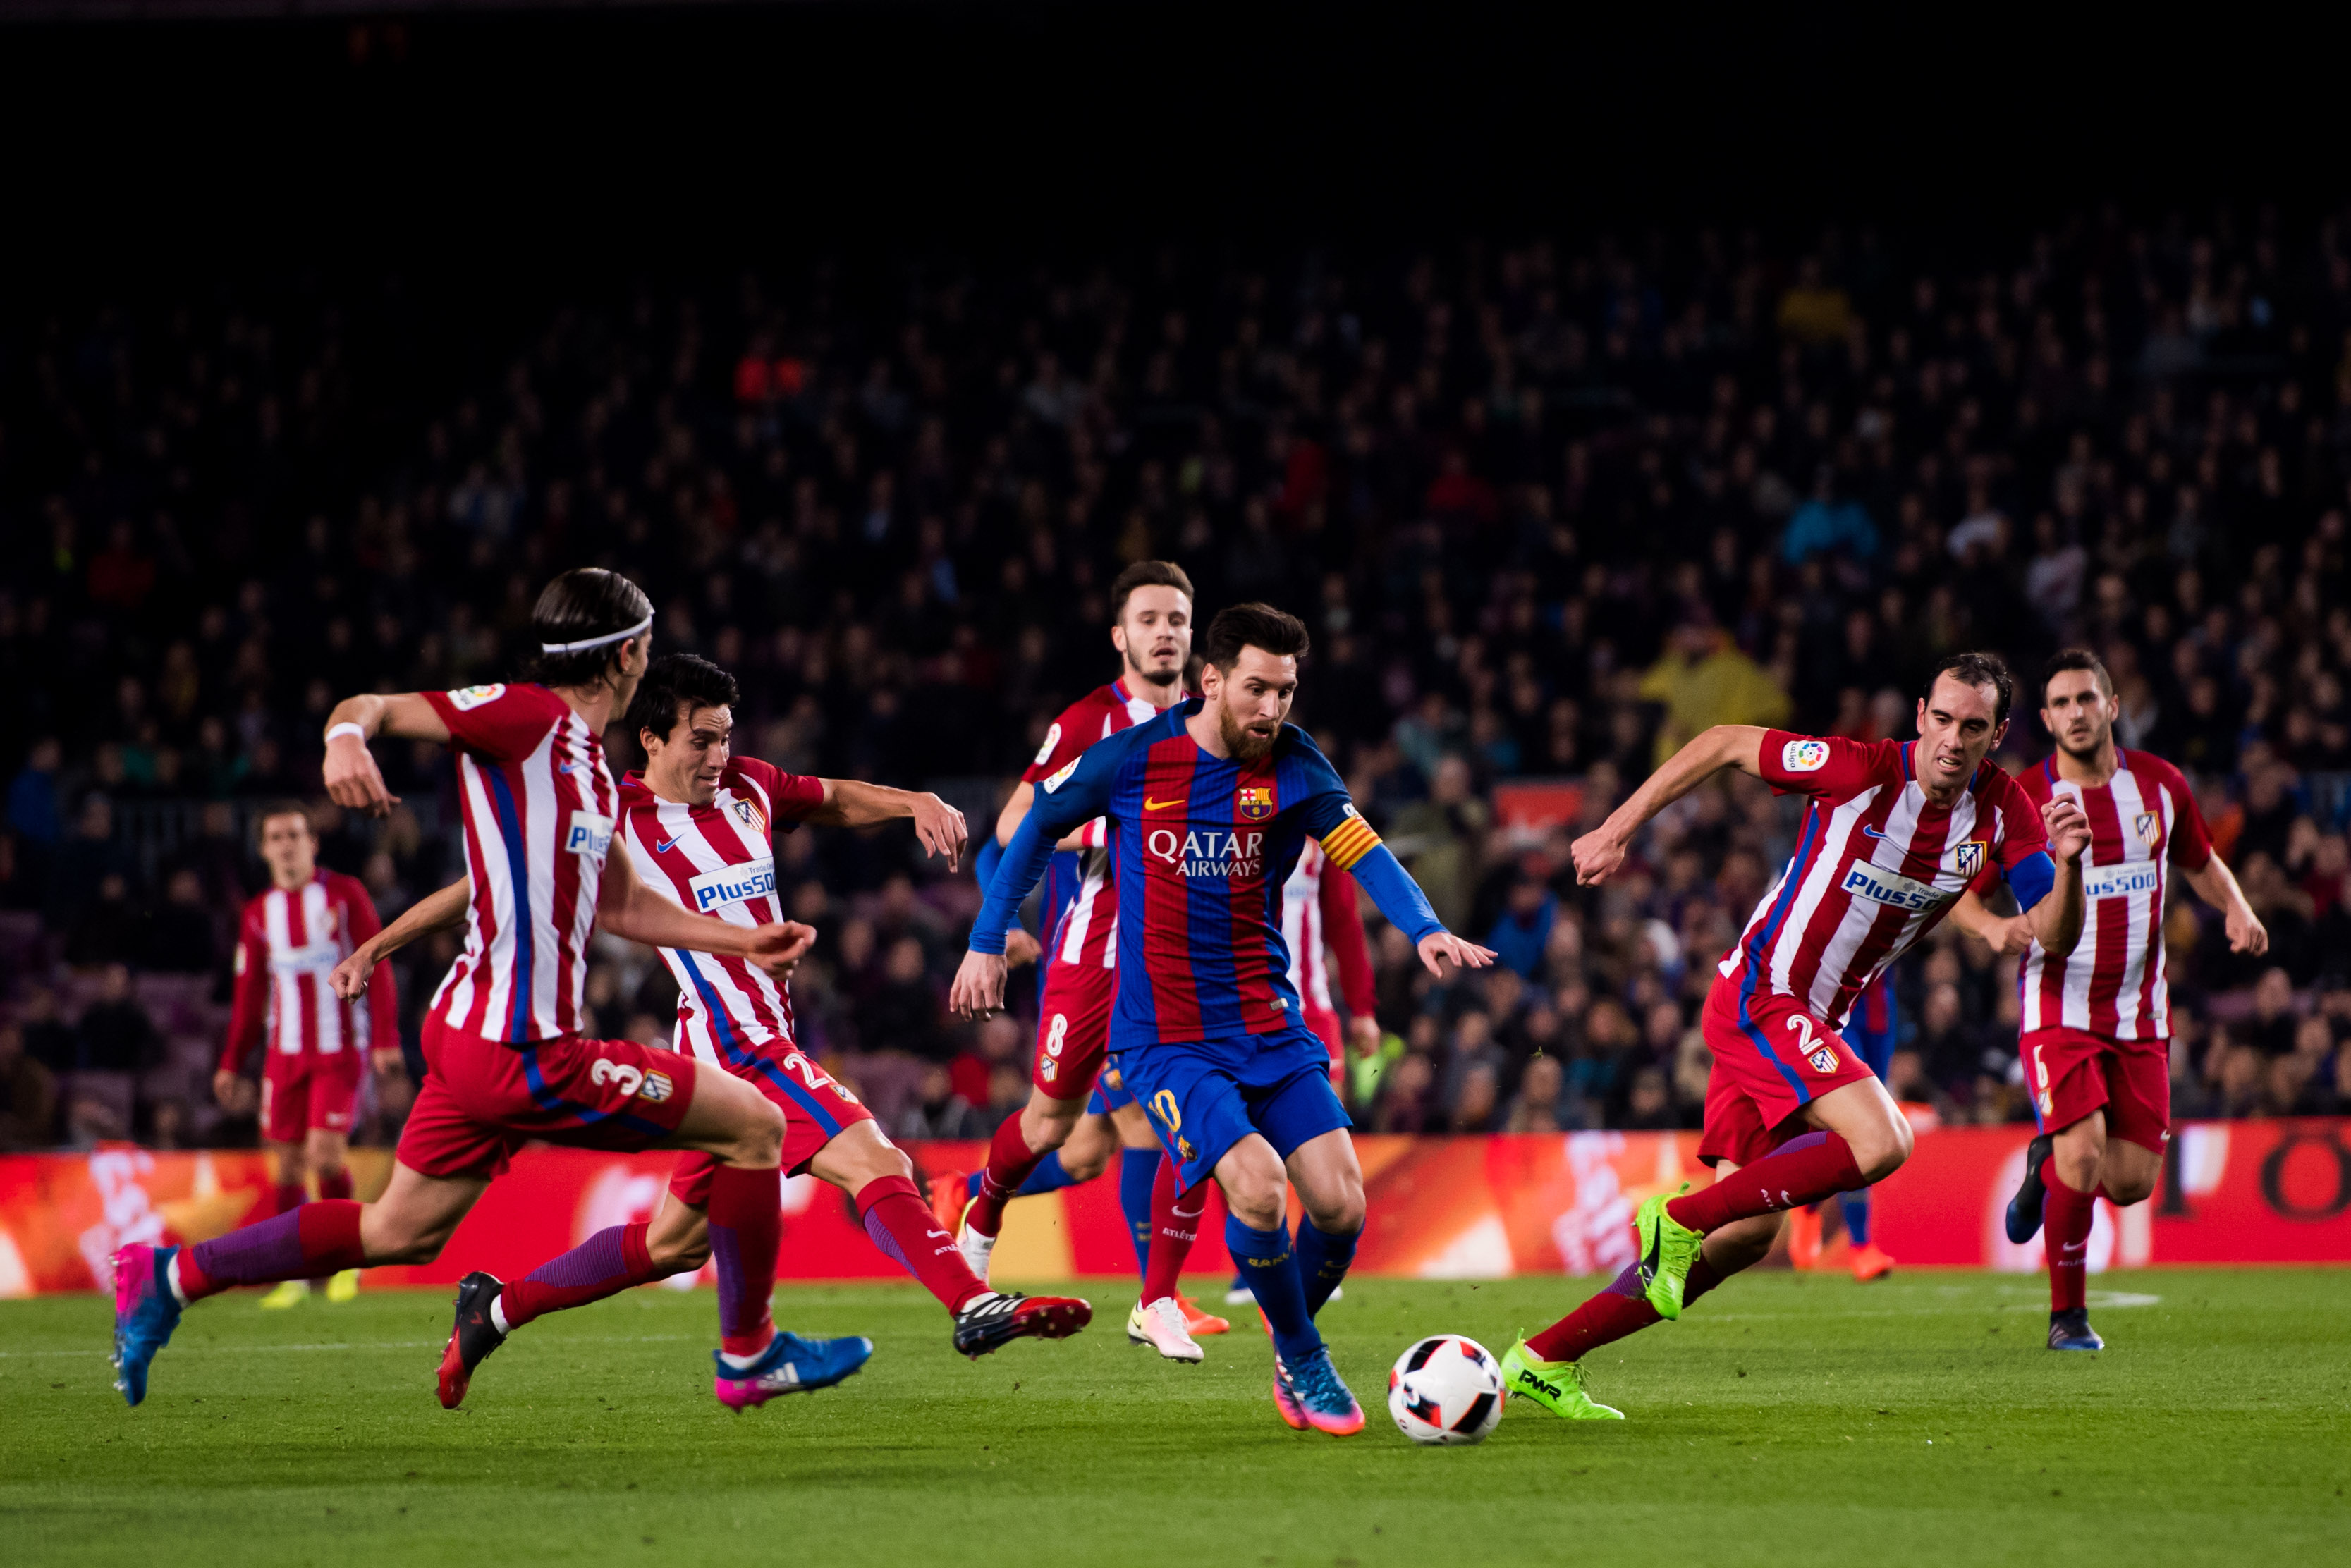 Lionel Messi Dribbling Style Explained: What Makes The Argentine So ...